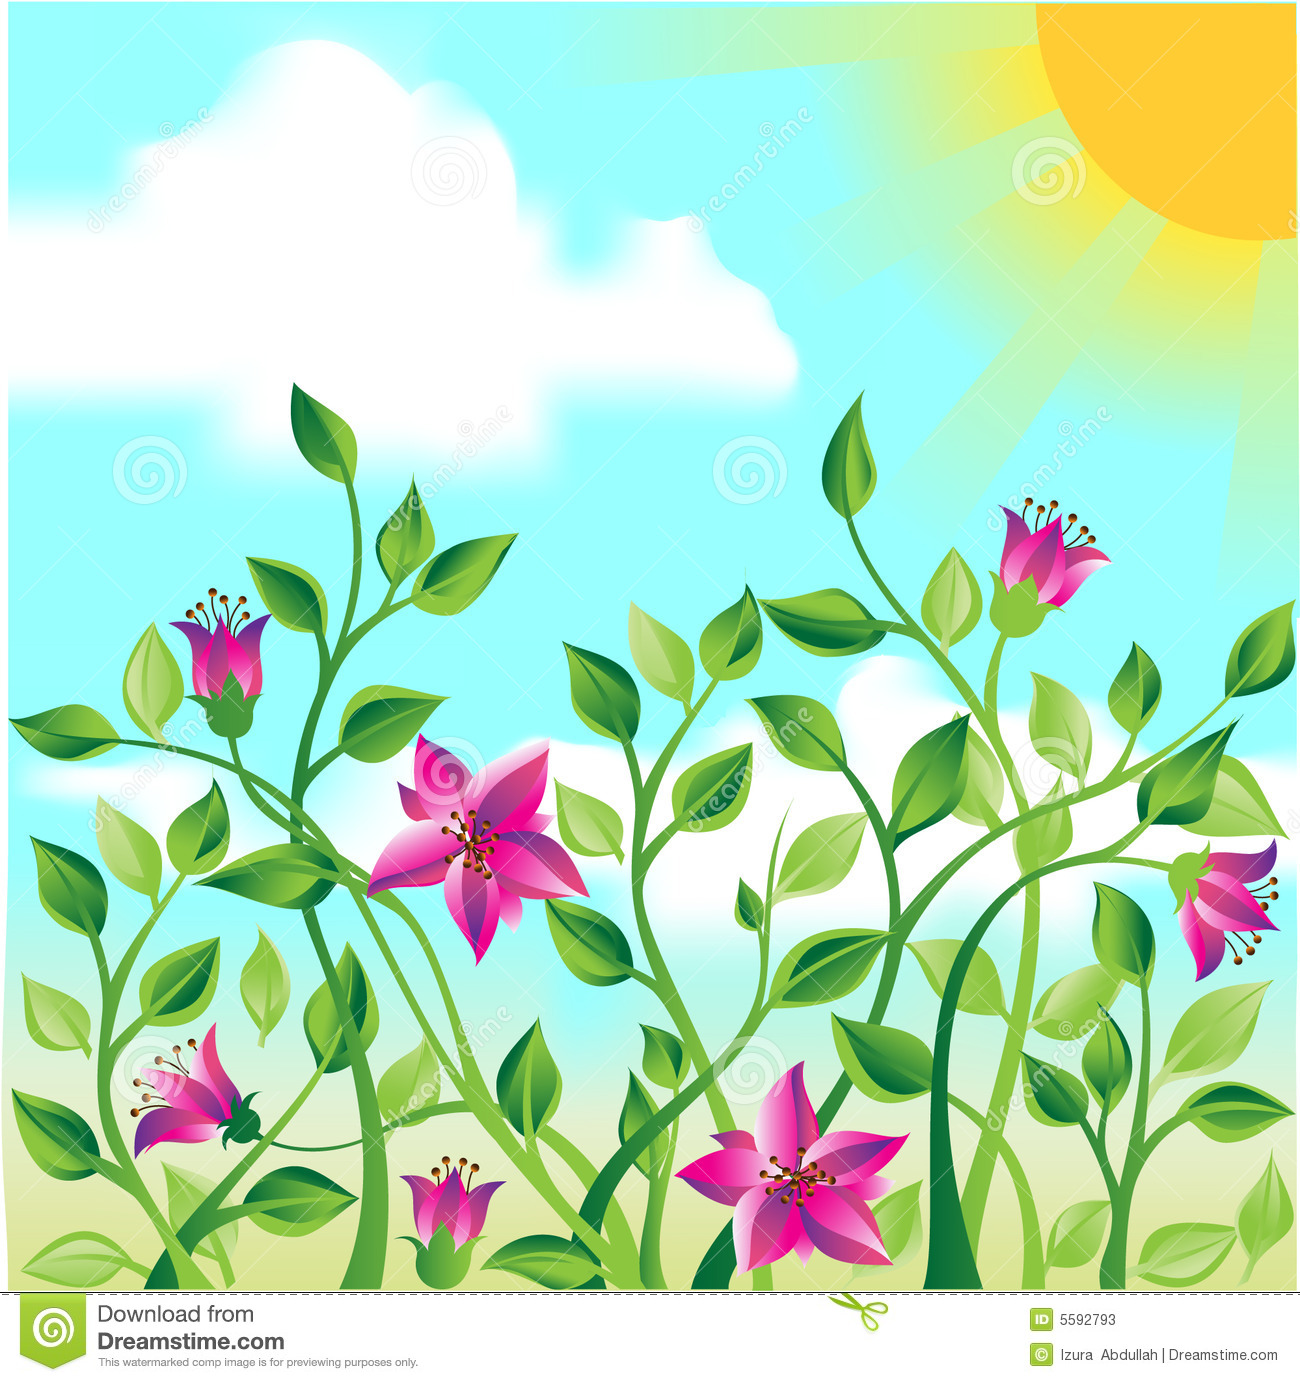 More Similar Stock Images Of   A Field Of Flowers